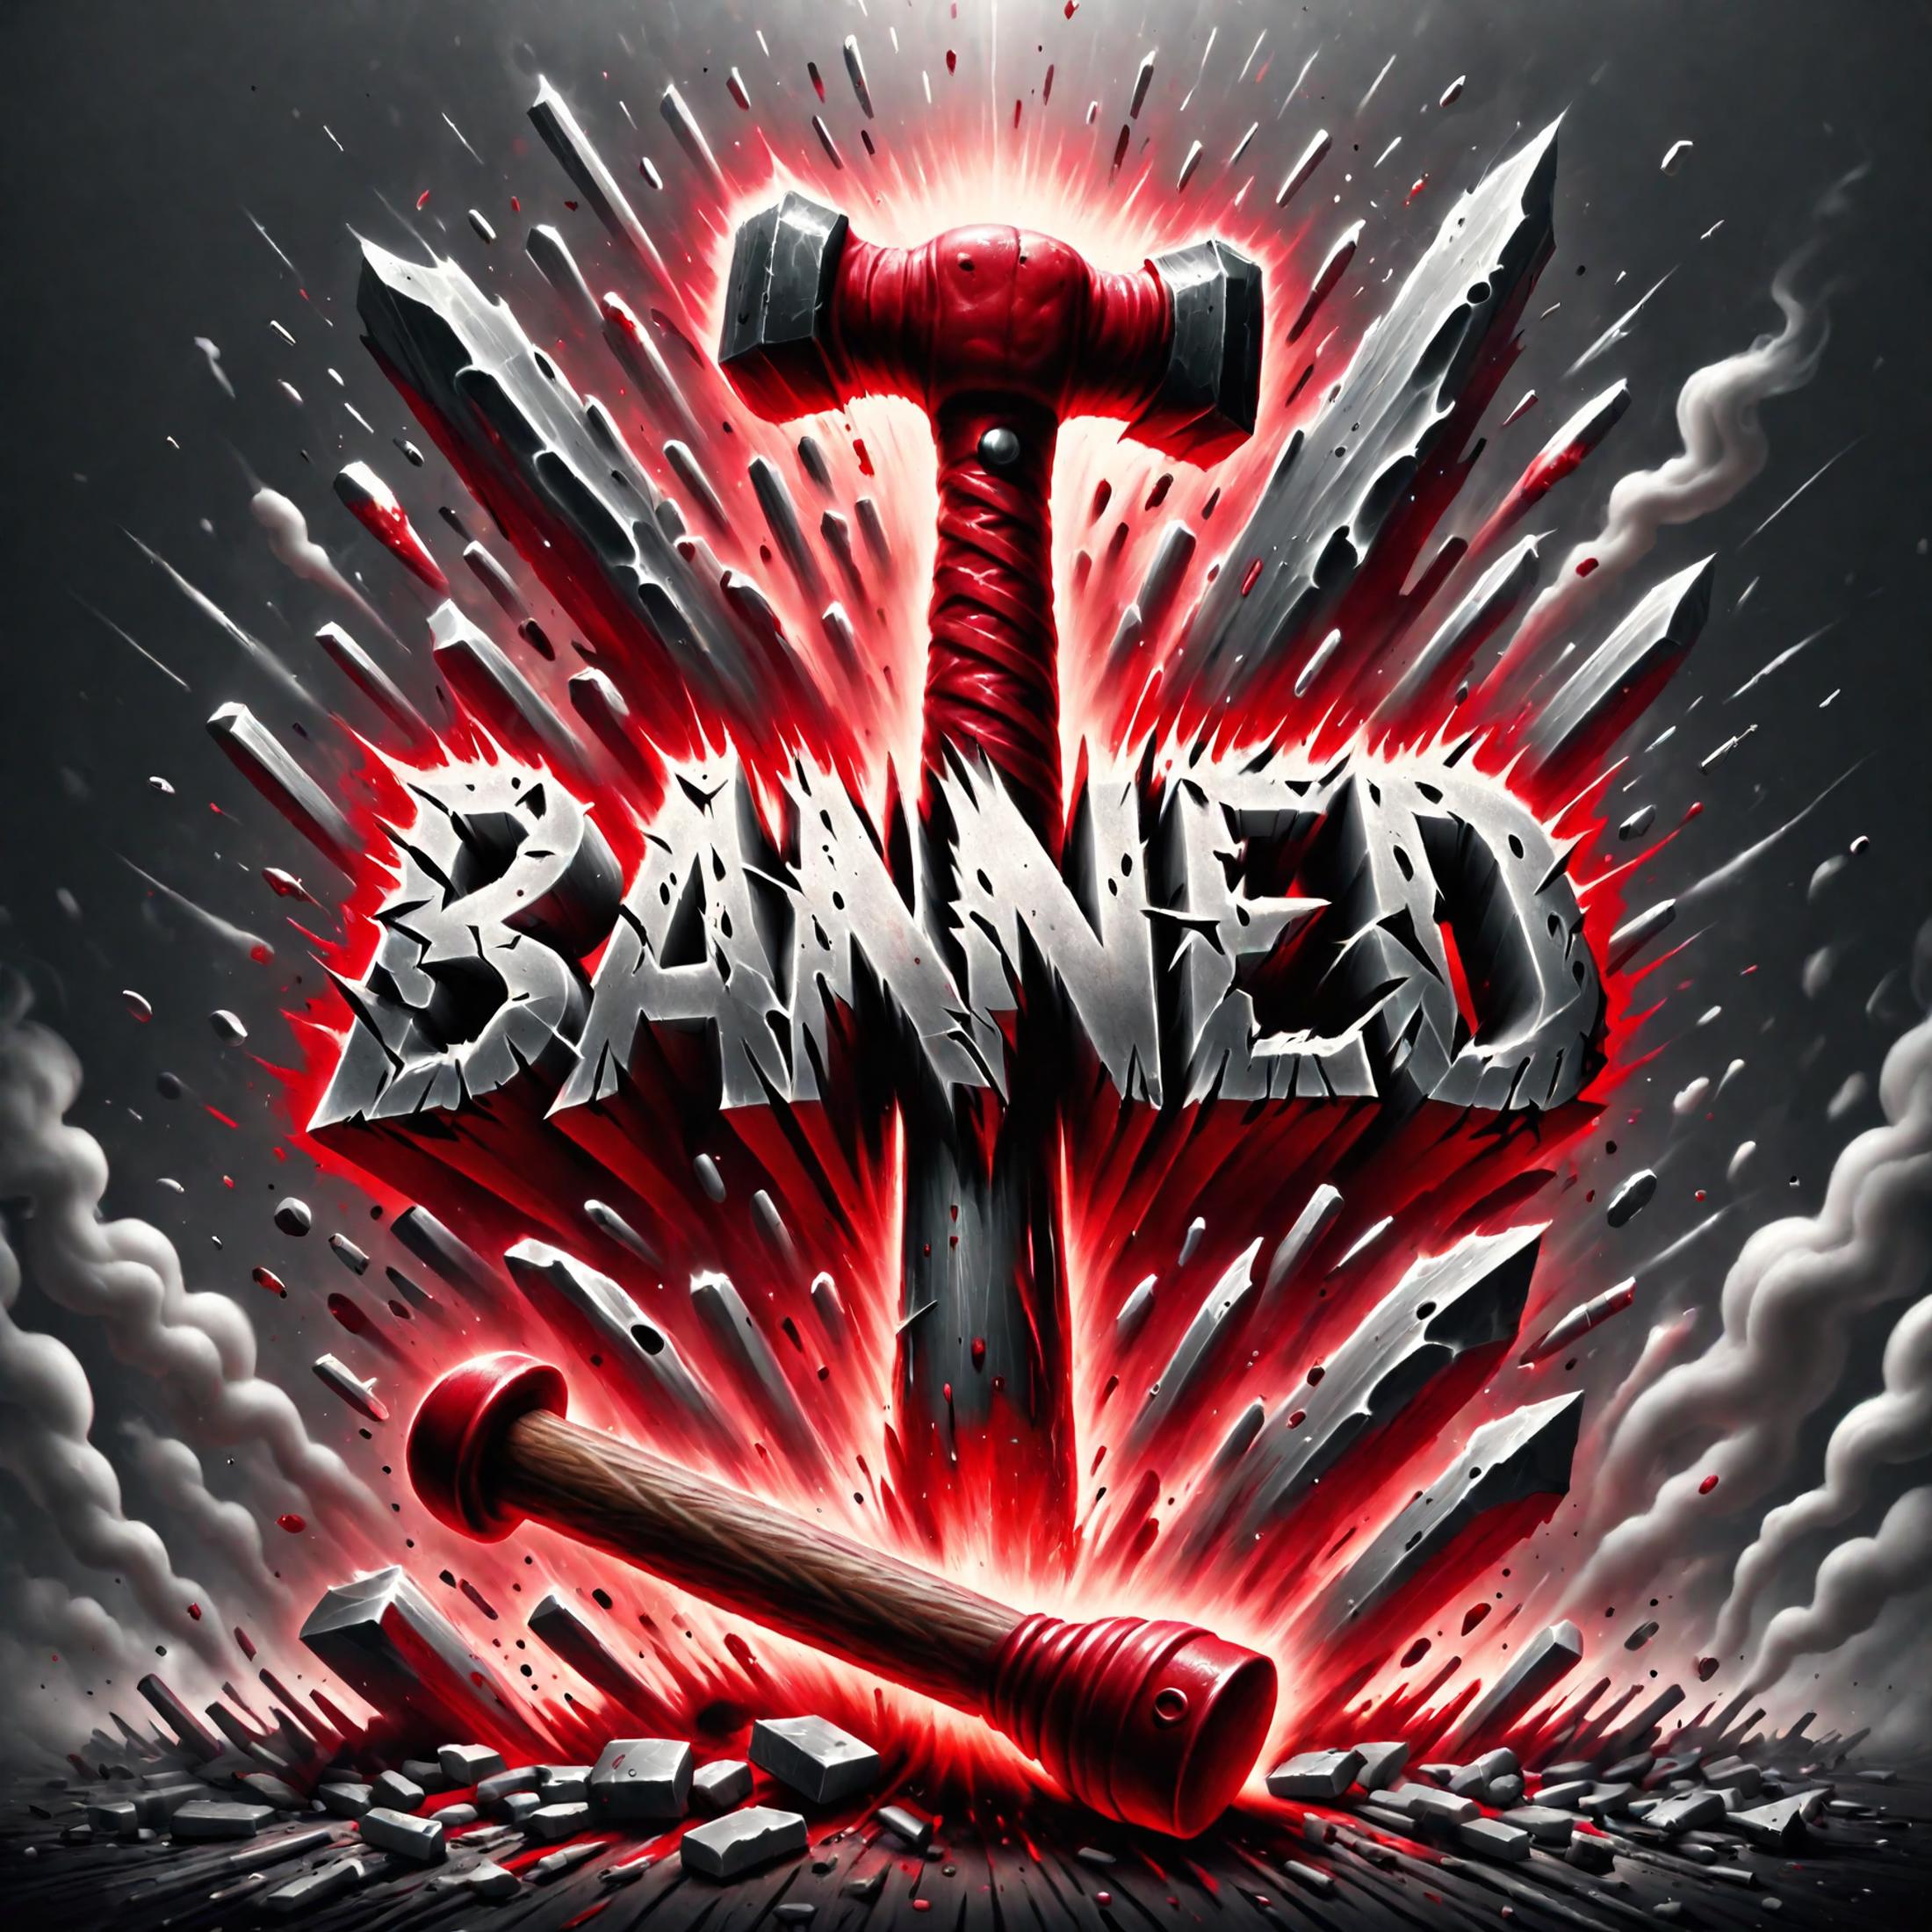 A red hammer with the word "Banned" written on it, surrounded by rocks and a red background.